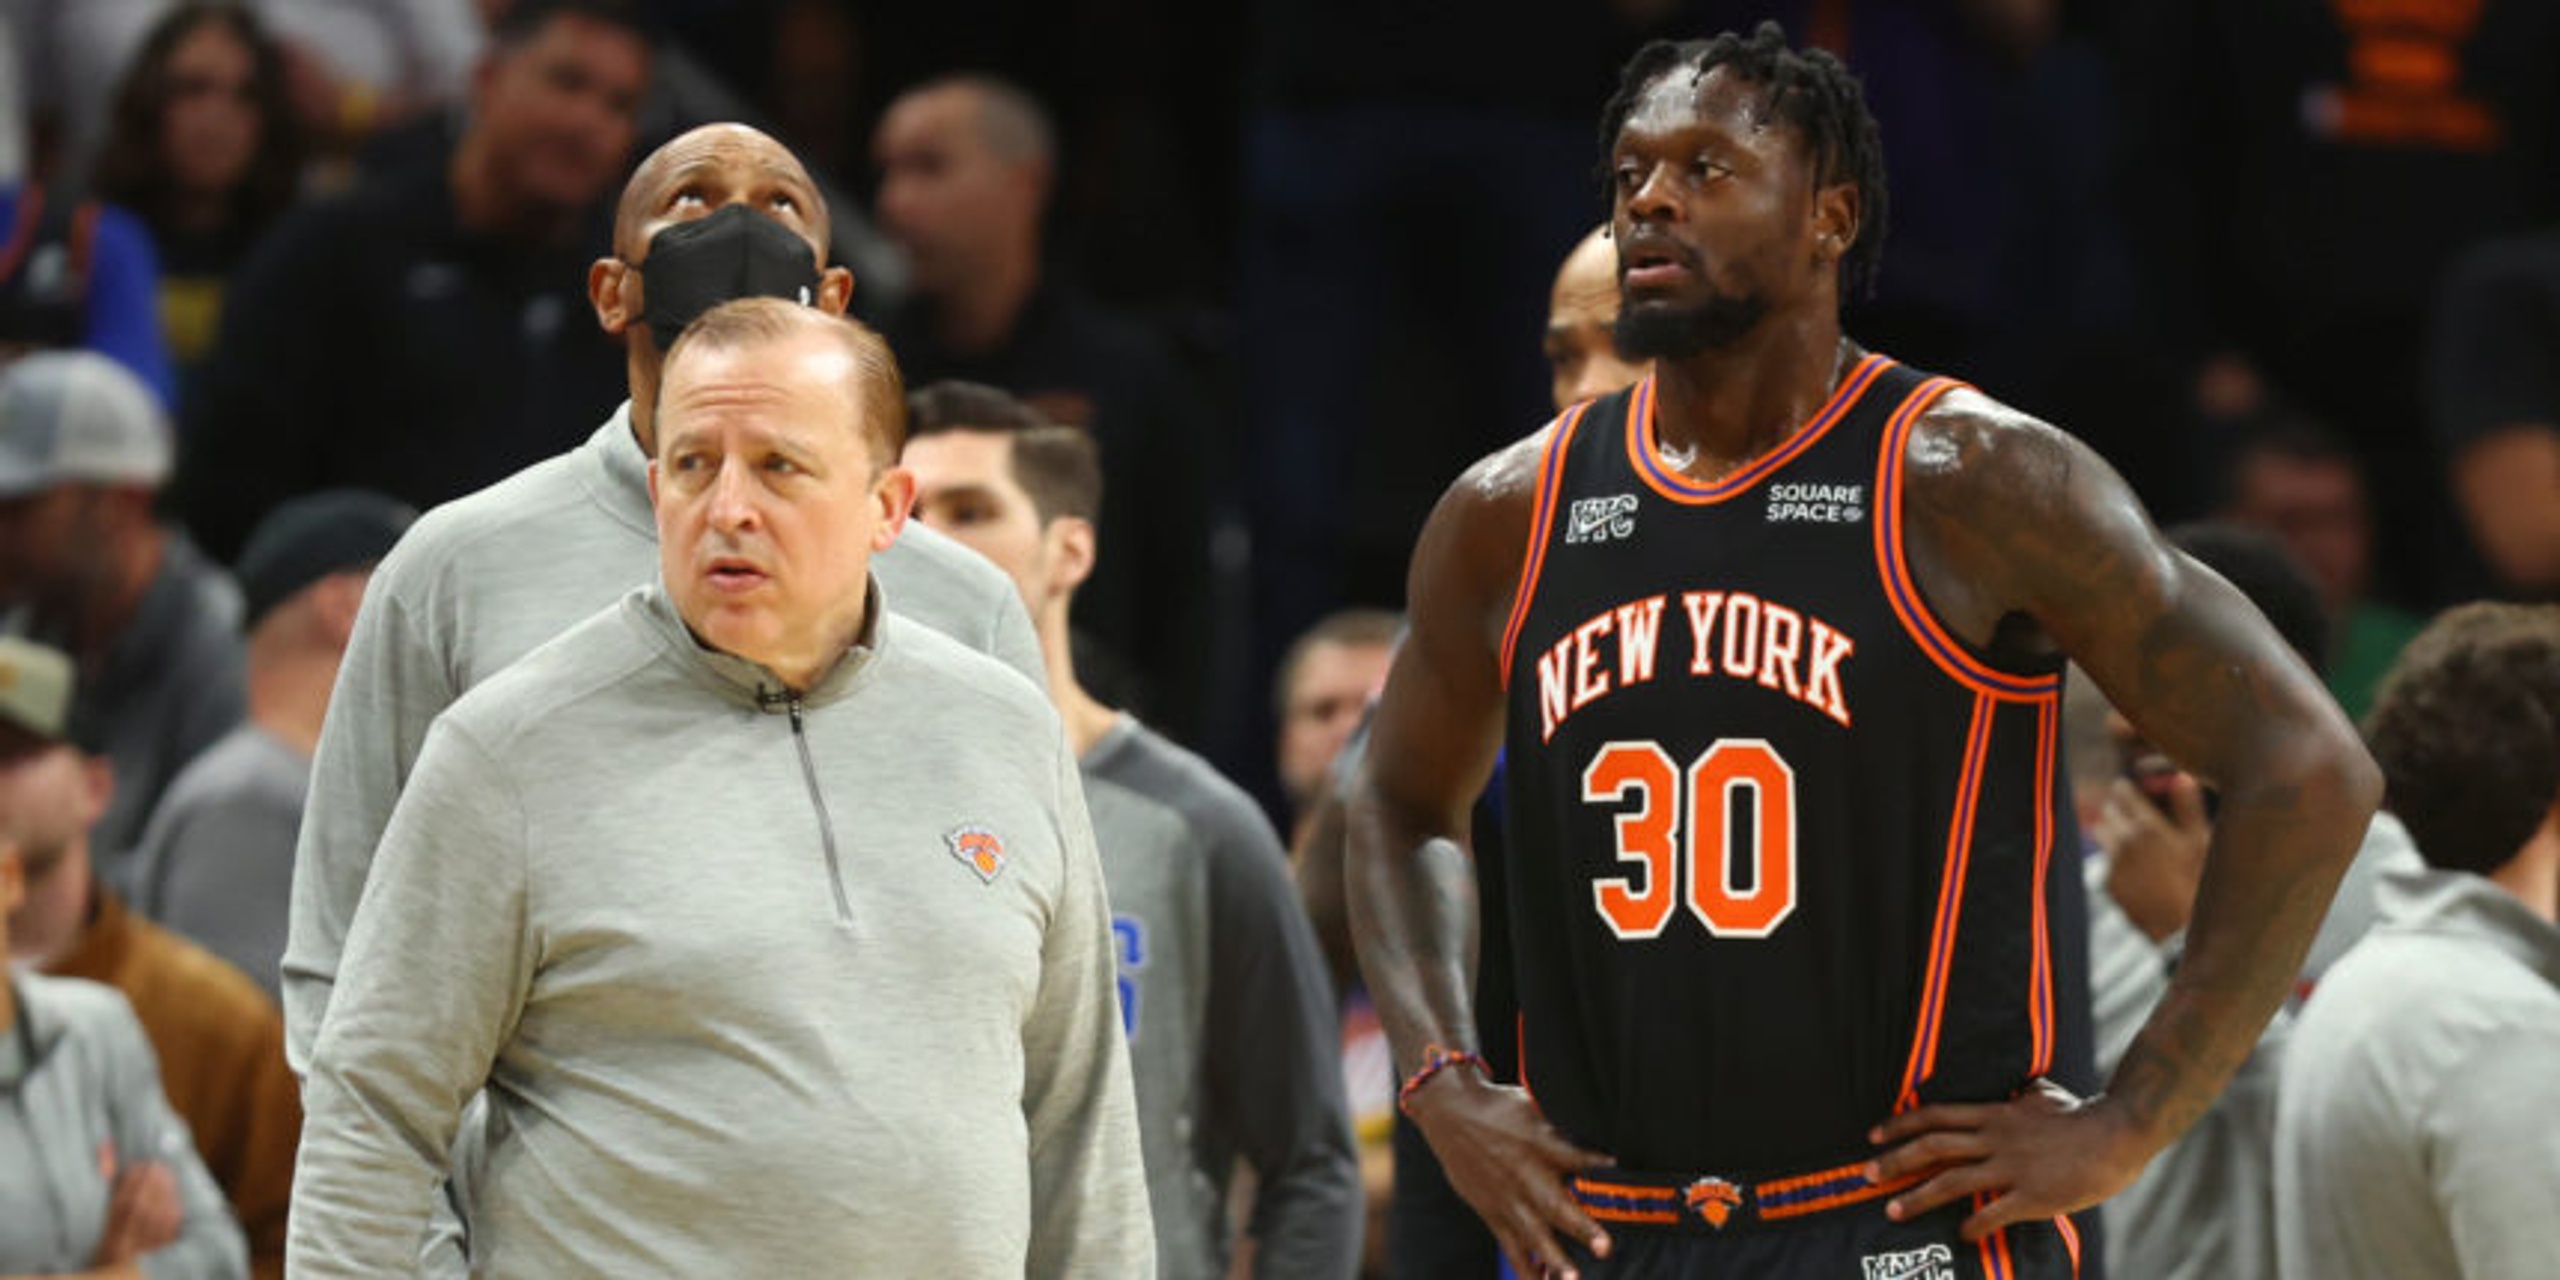 After rare playoff appearance, Randle, Knicks take step back